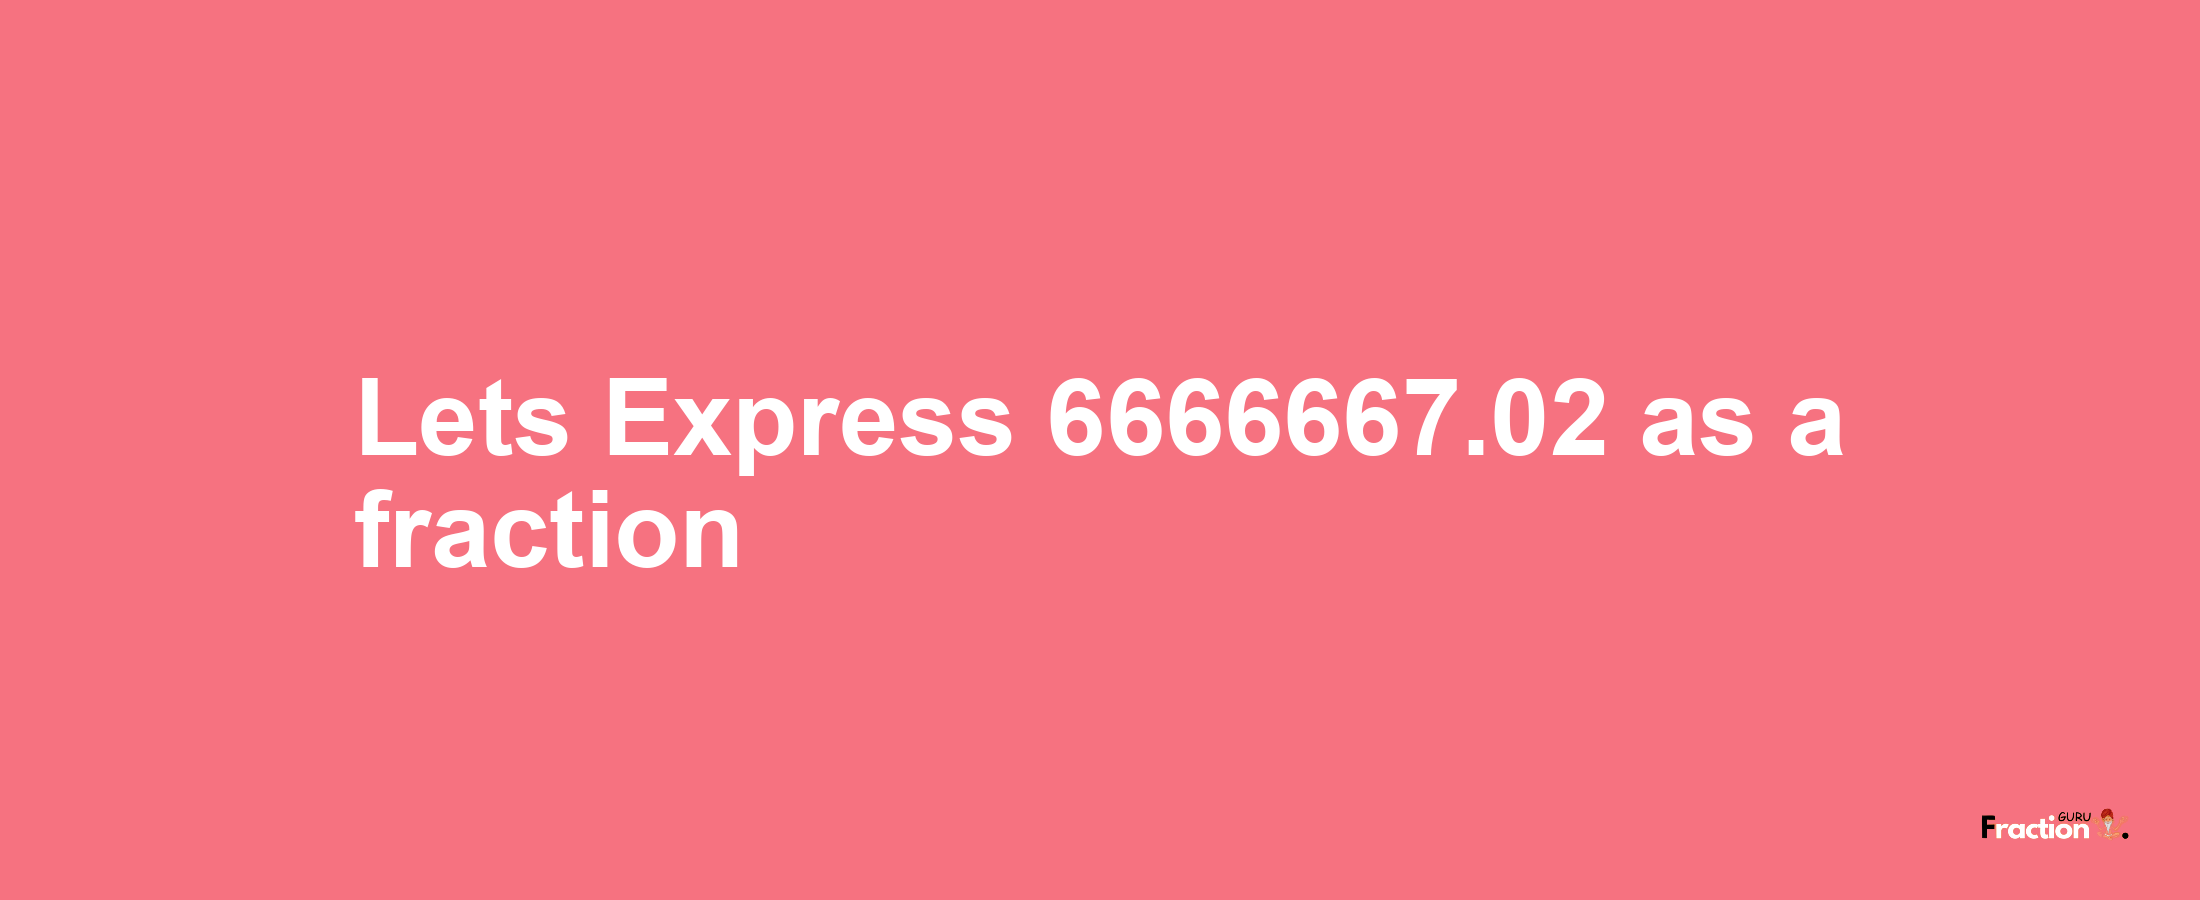 Lets Express 6666667.02 as afraction